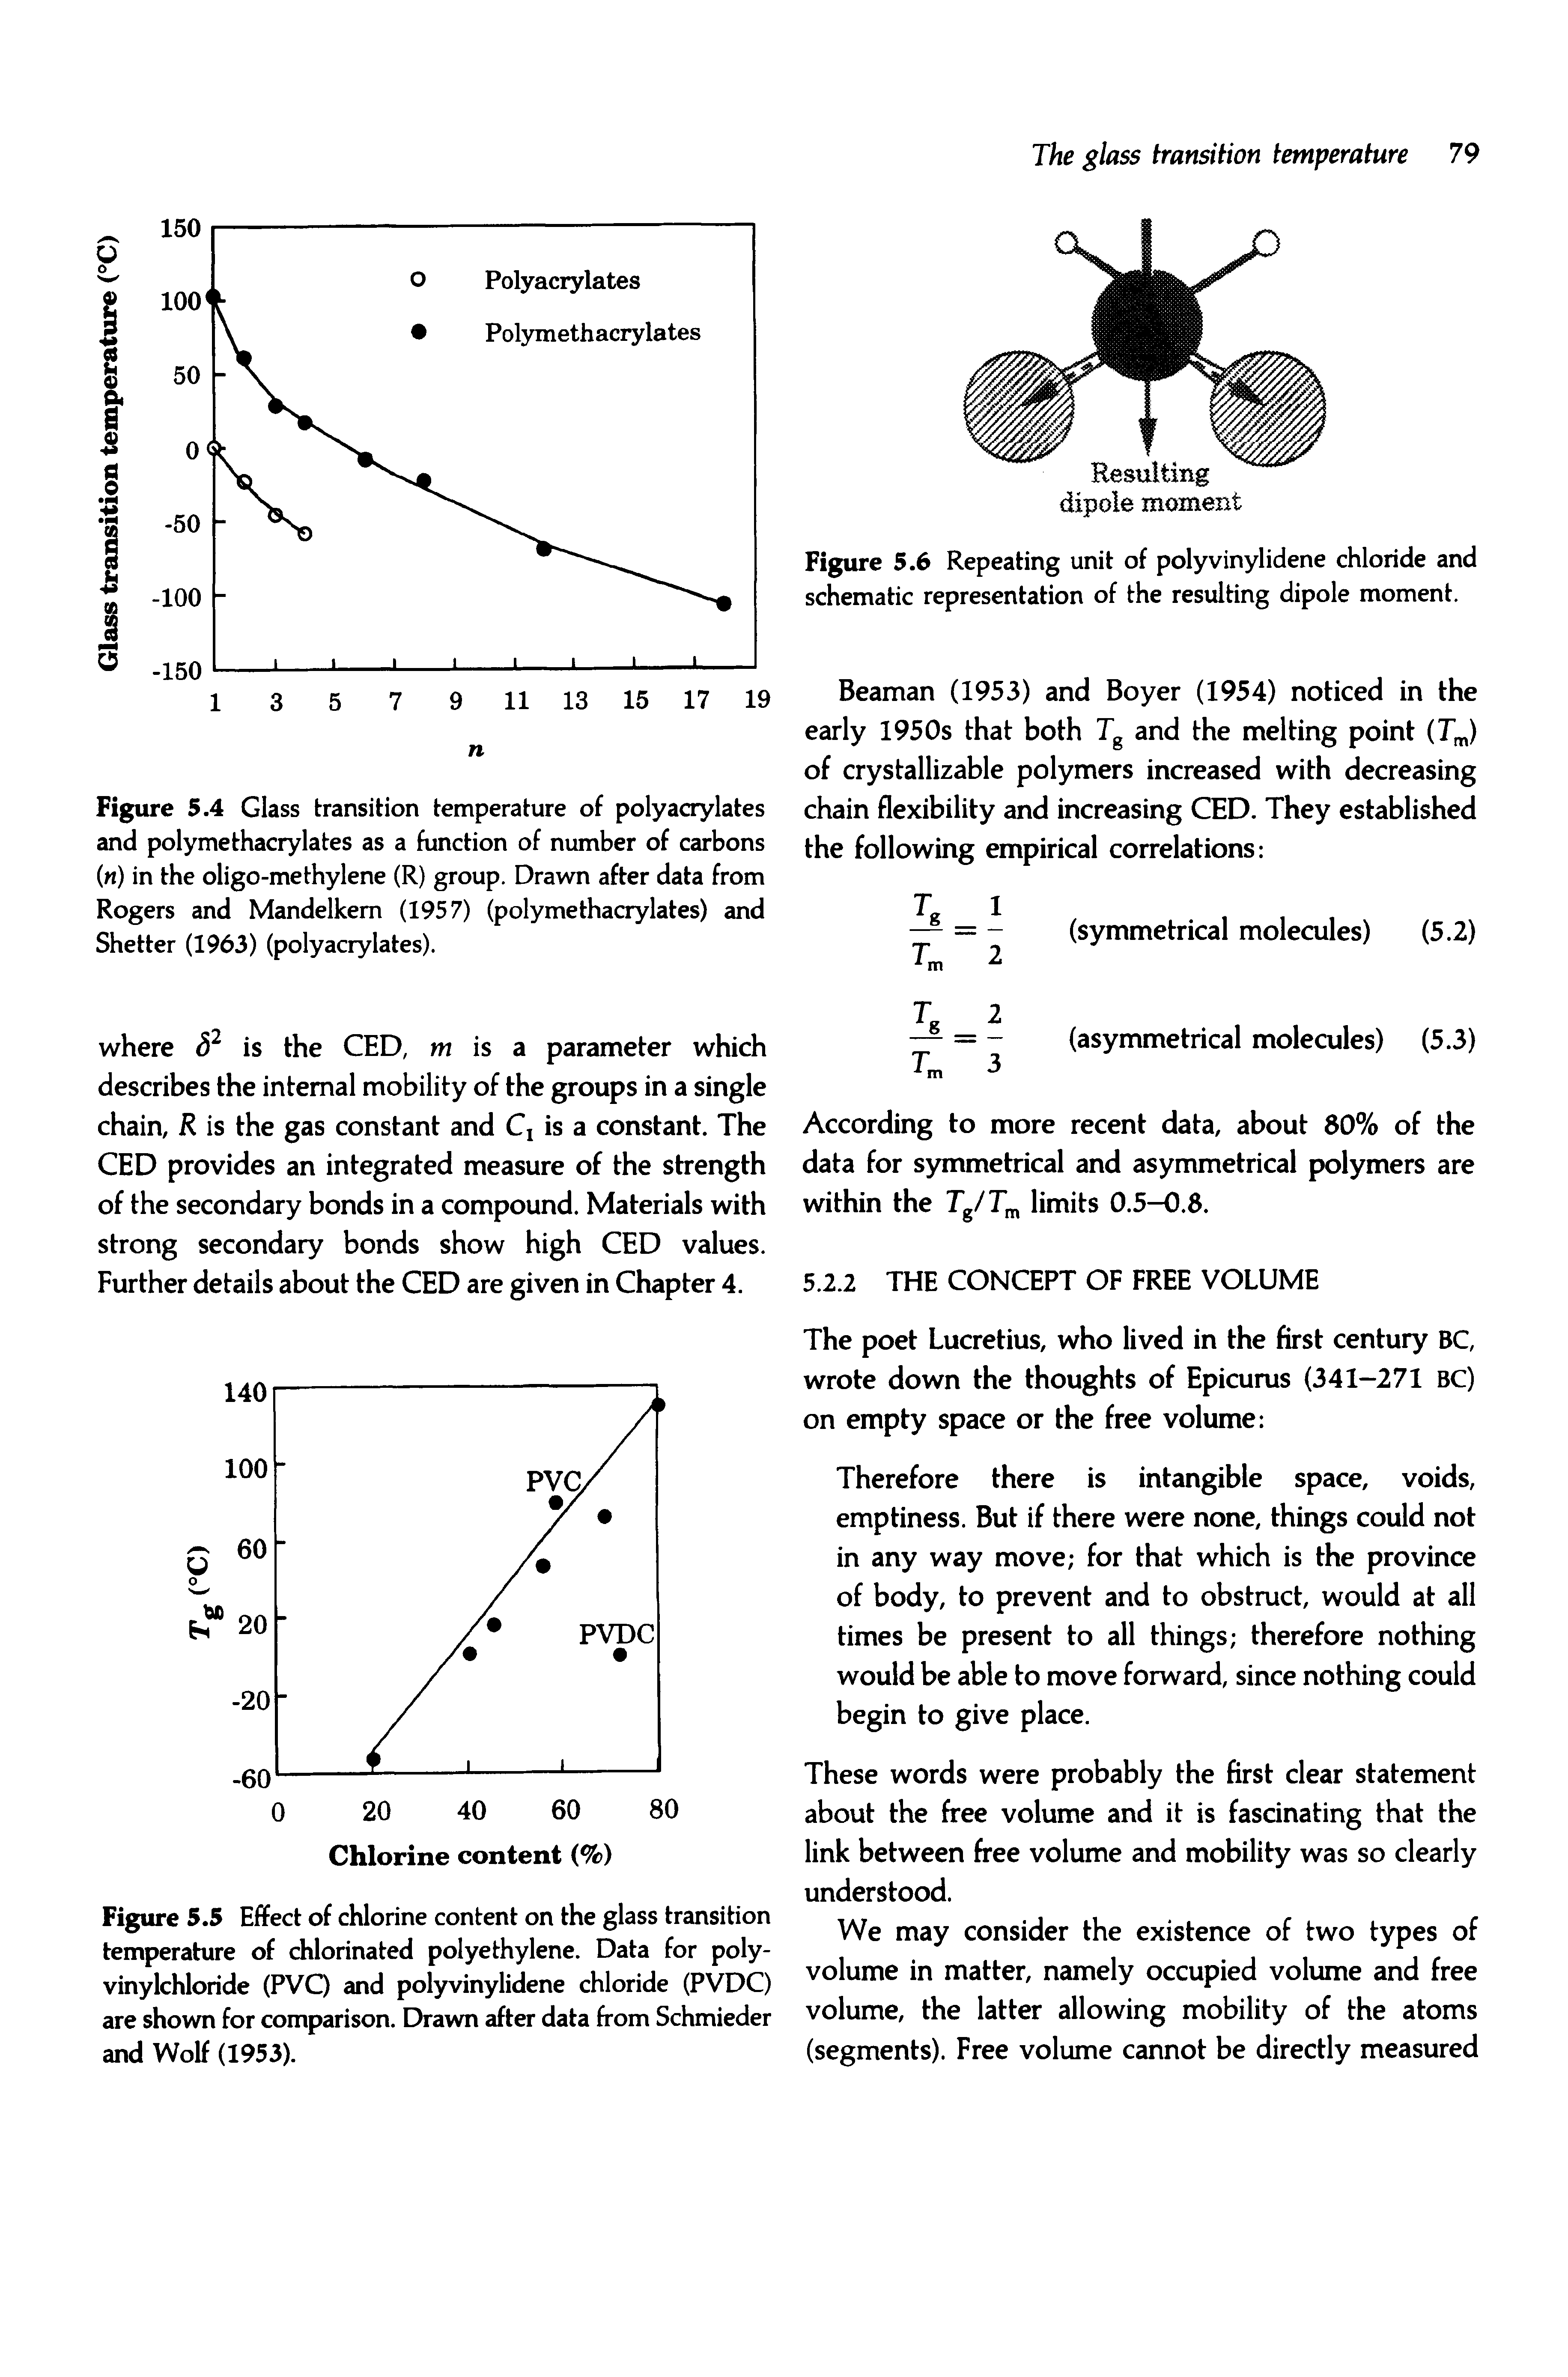 Figure 5.5 Effect of chlorine content on the glass transition temperature of chlorinated polyethylene. Data for polyvinylchloride (PVC) and polyvinylidene chloride (PVDC) are shown for comparison. Drawn after data from Schmieder and Wolf (1953).